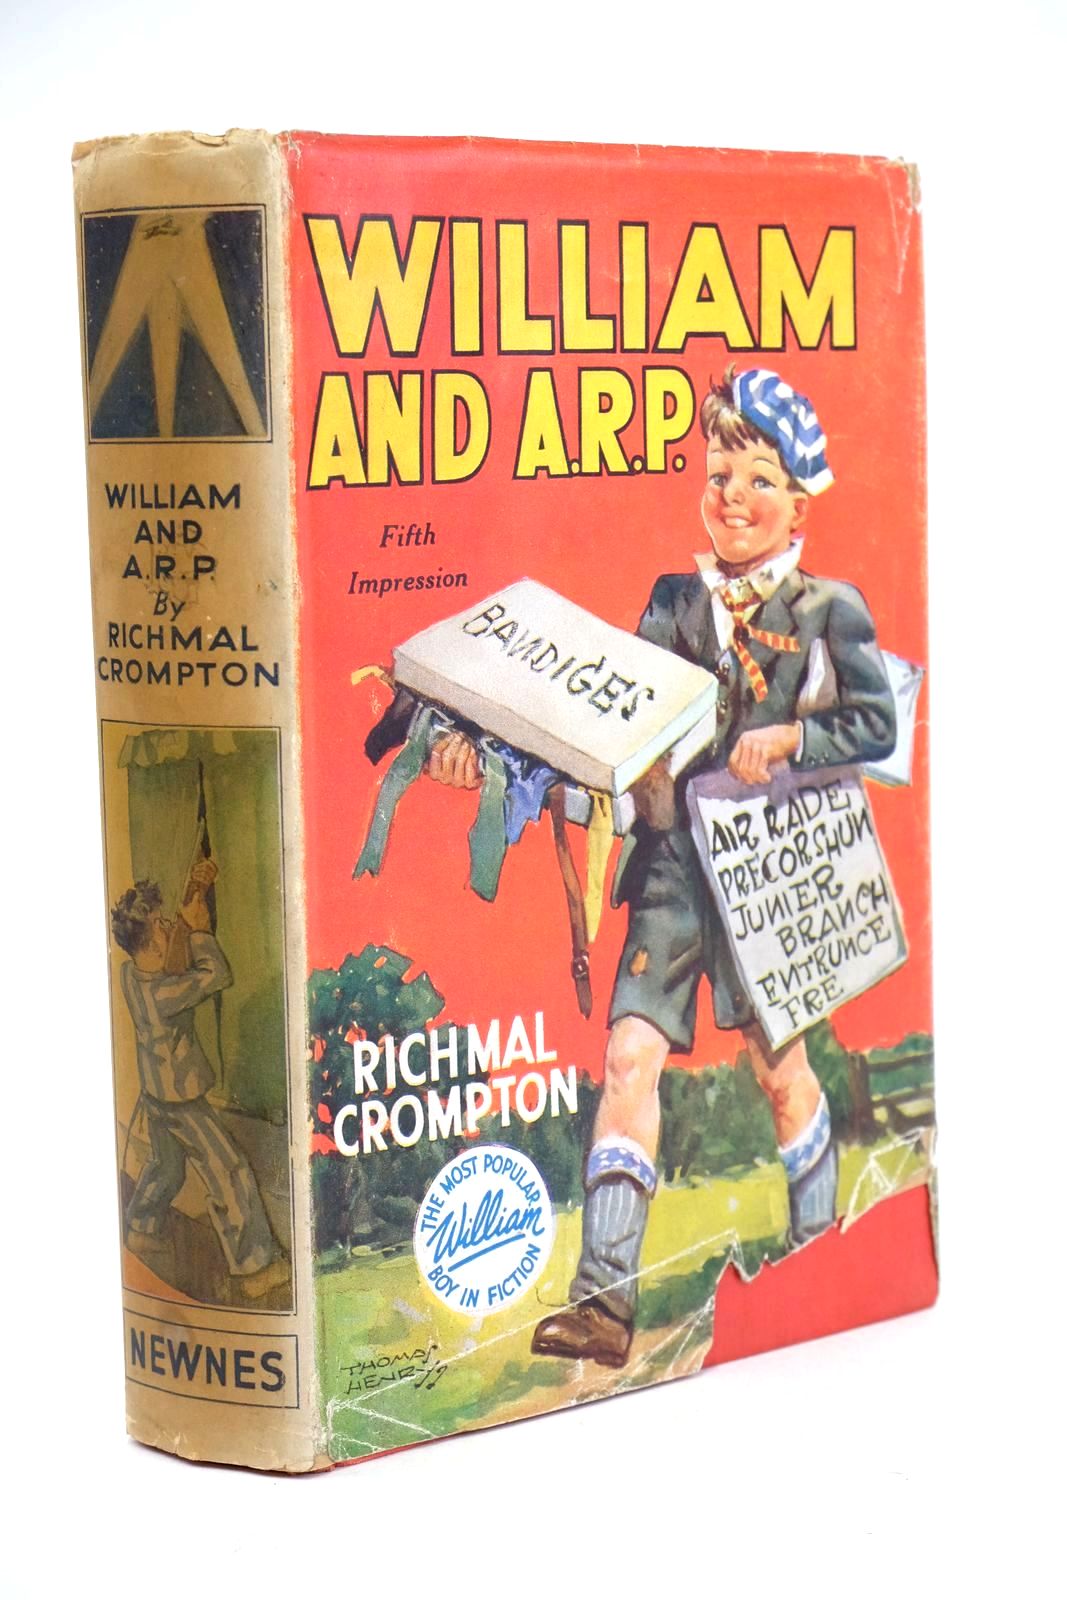 Photo of WILLIAM AND A.R.P.- Stock Number: 1324571